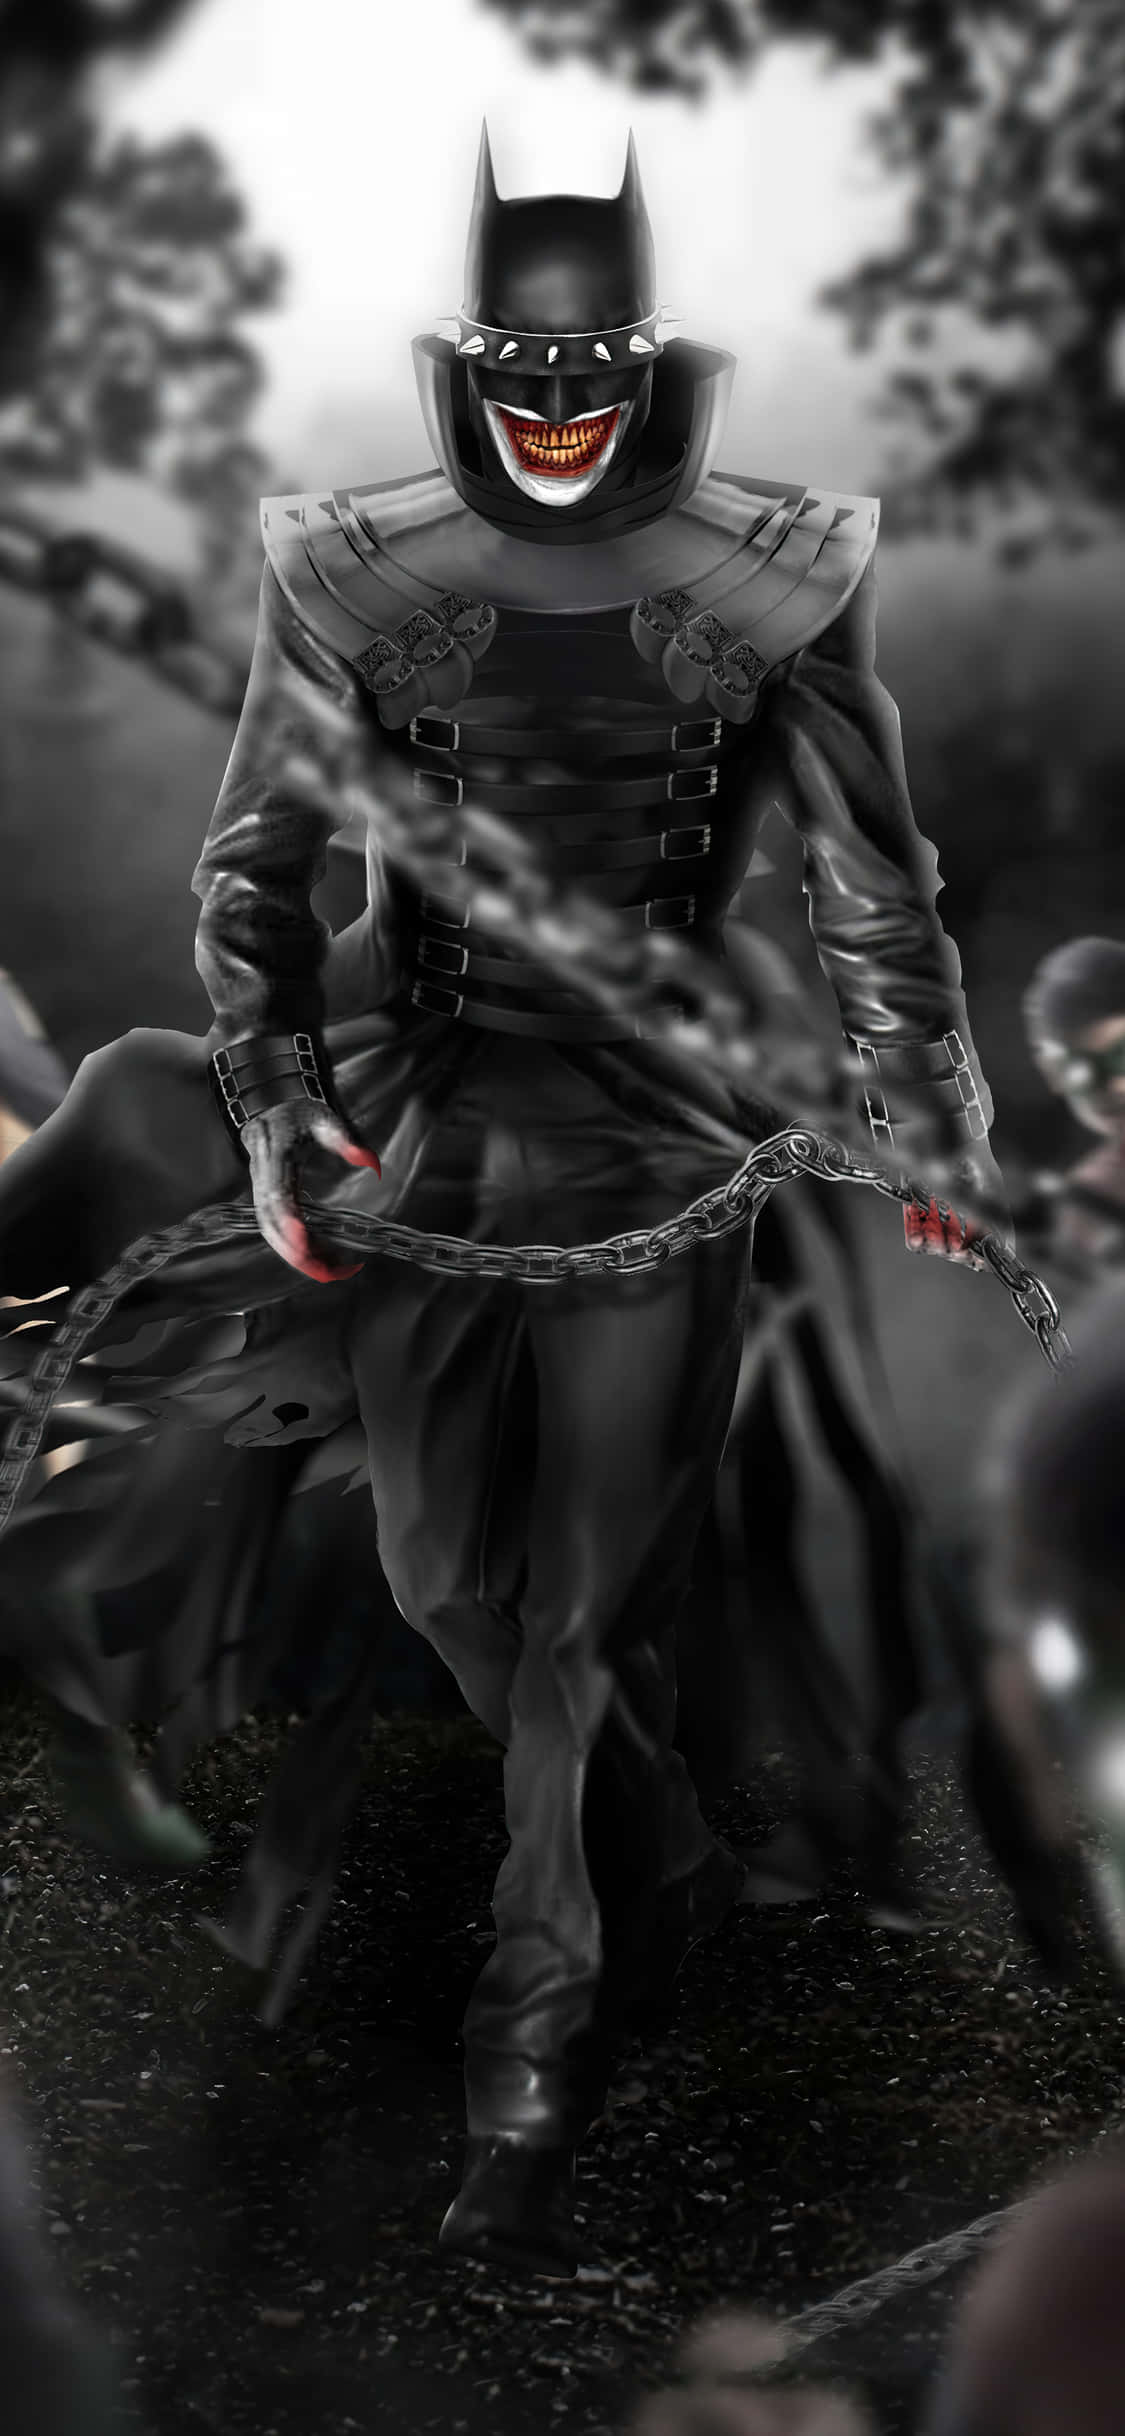 Darkness looms as The Batman Who Laughs plans his sinister schemes. Wallpaper